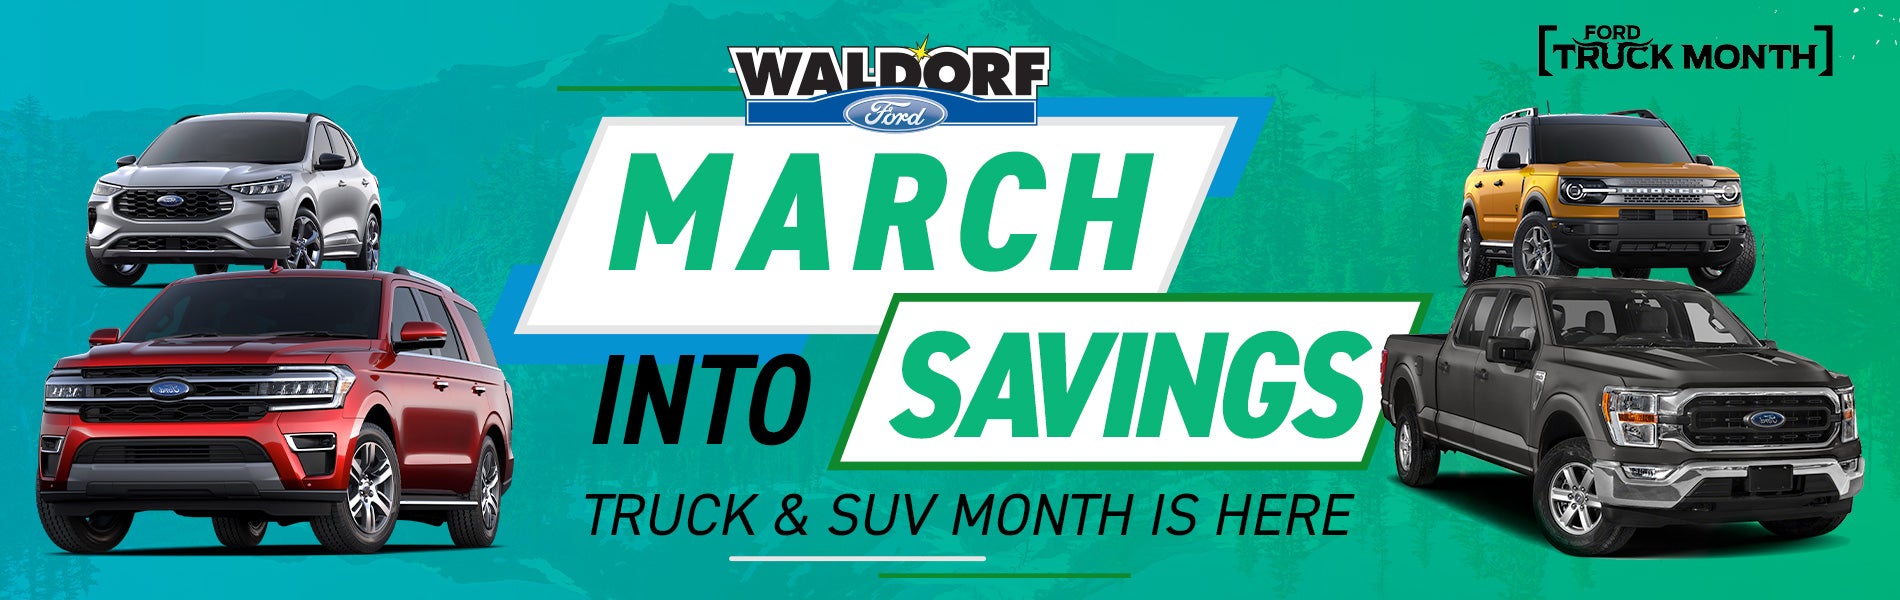 March Into Savings!